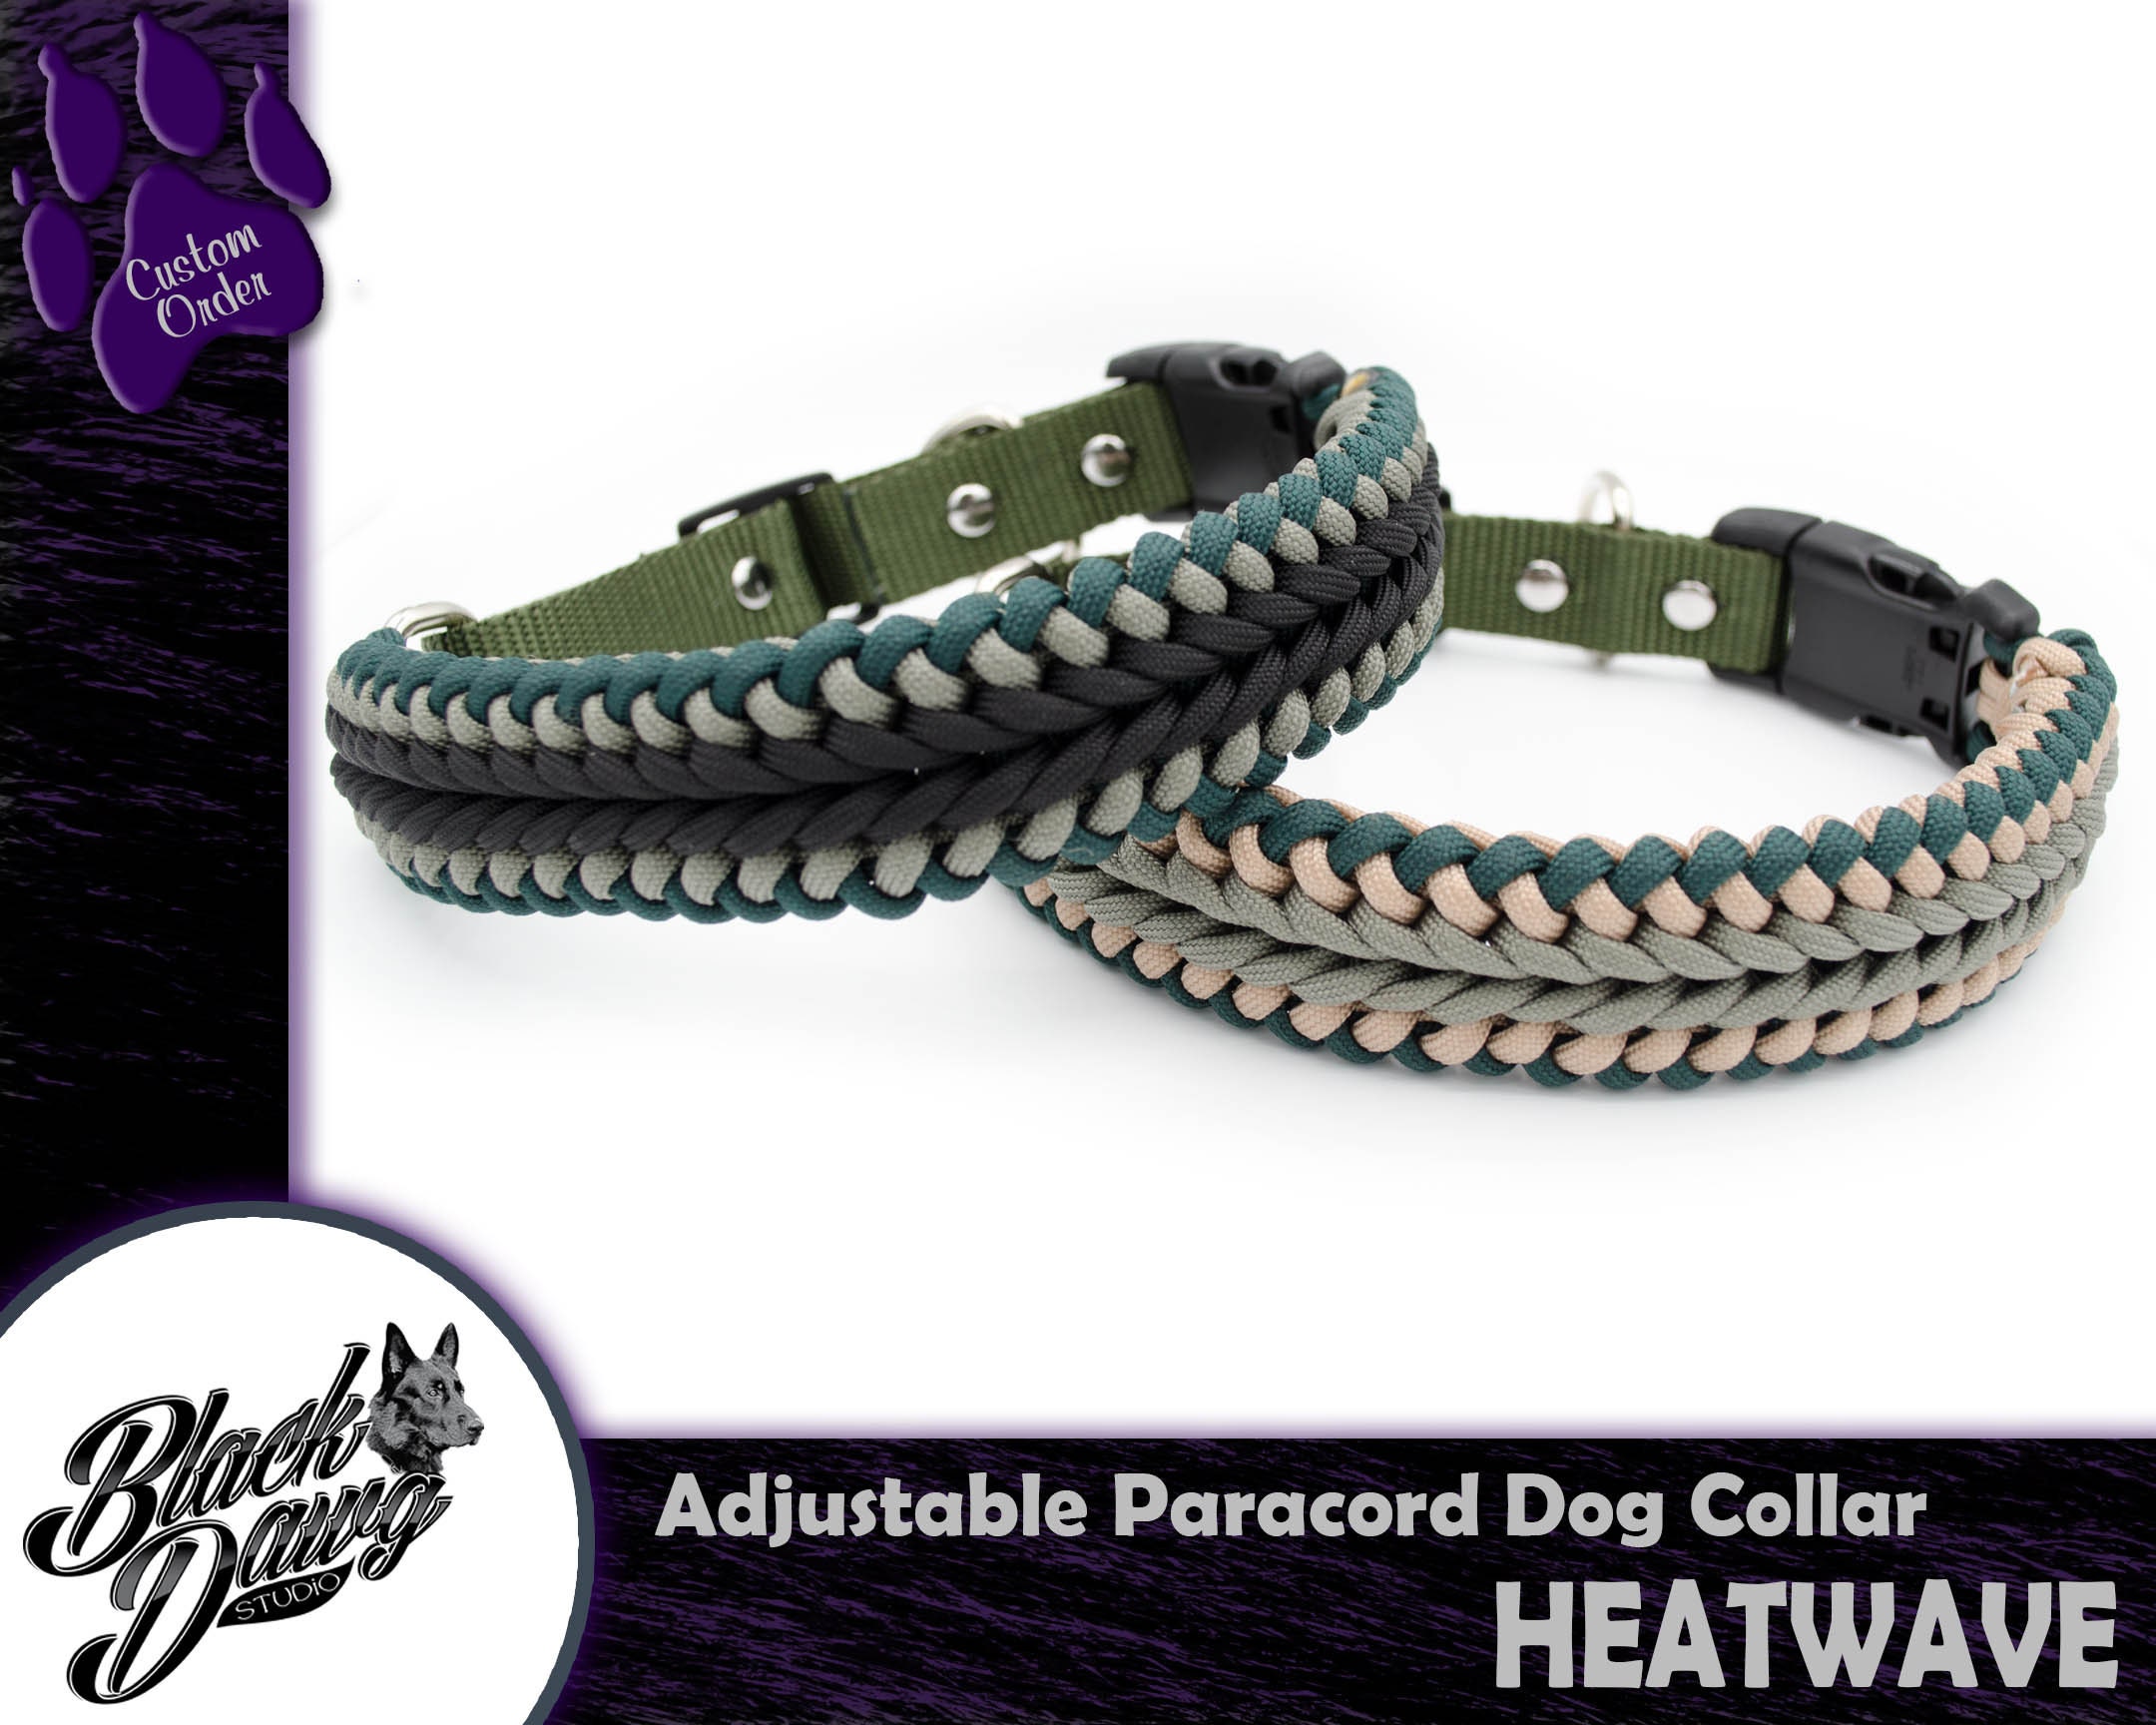 Tactical Buckle, Metal & Plastic Paracord Clips for Paracord  Bracelets/dog/pet Collar Side Release 